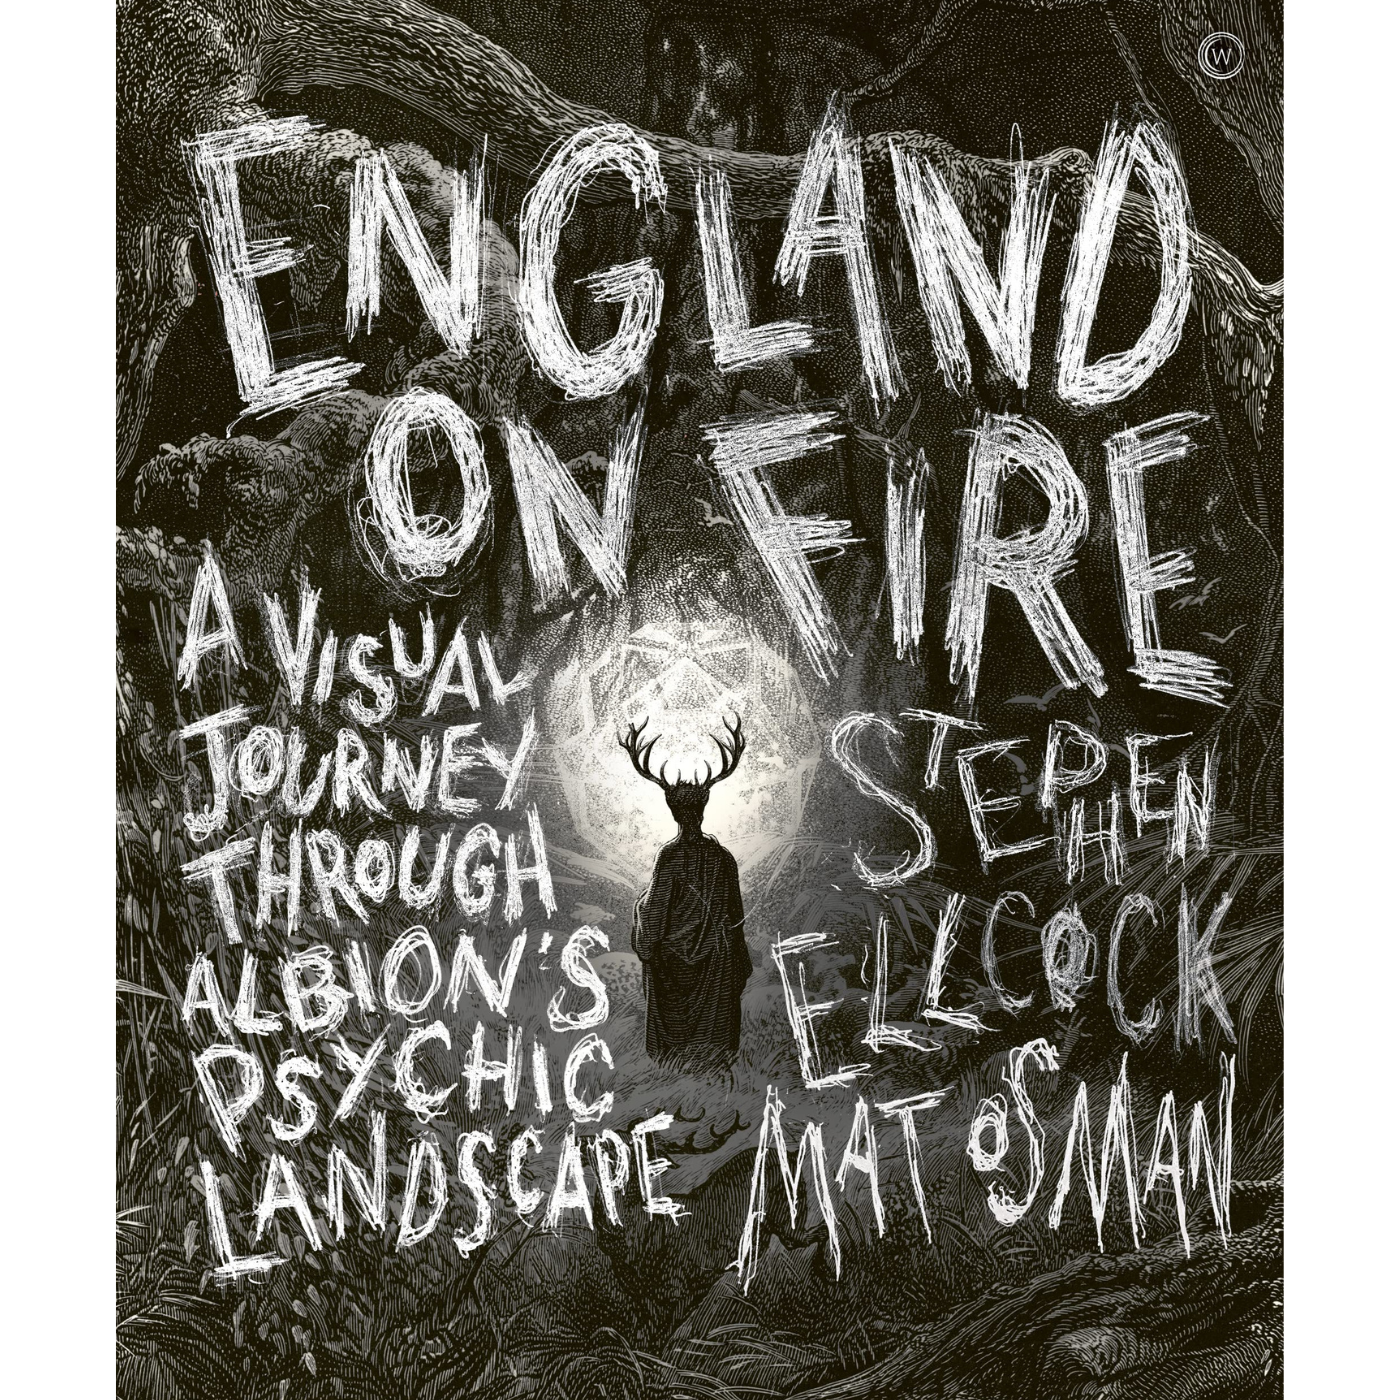 England on Fire: A Visual Journey Through England's Psychic Landscape